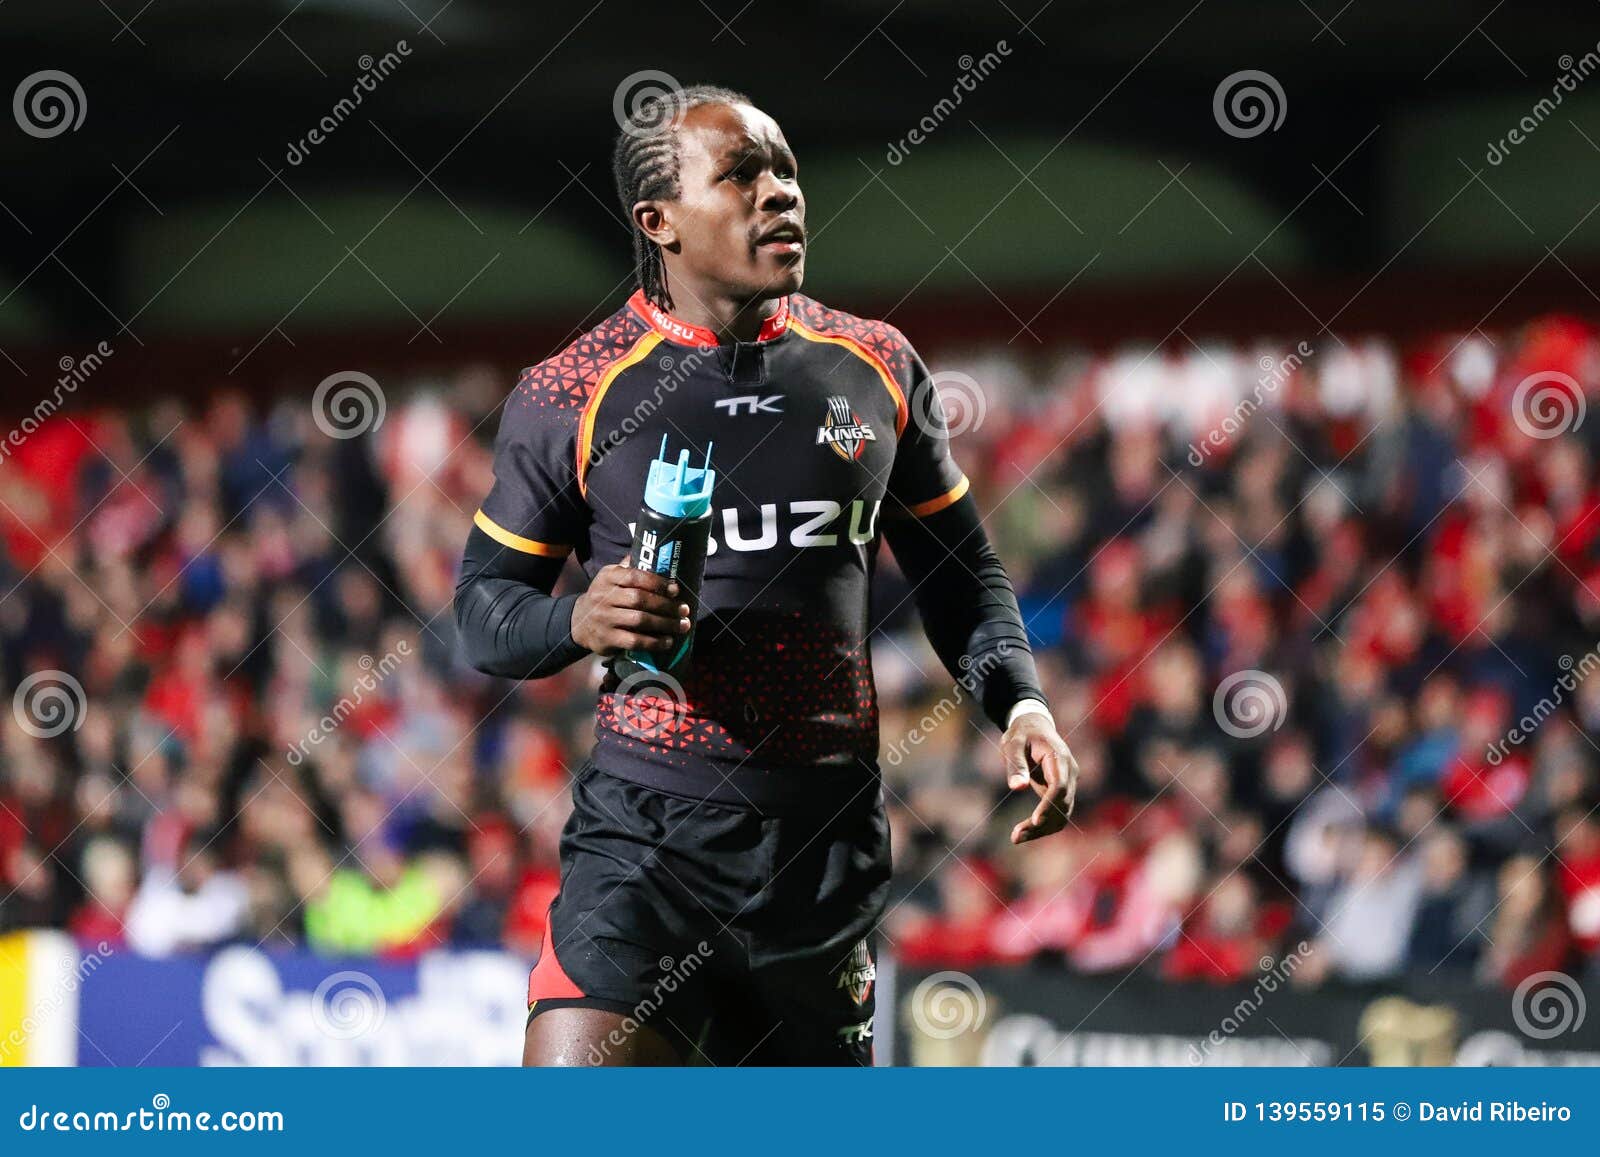 Yaw Penxe at the Munster Rugby Versus Isuzu Southern Kings Match at the Irish Independent Park Editorial Image